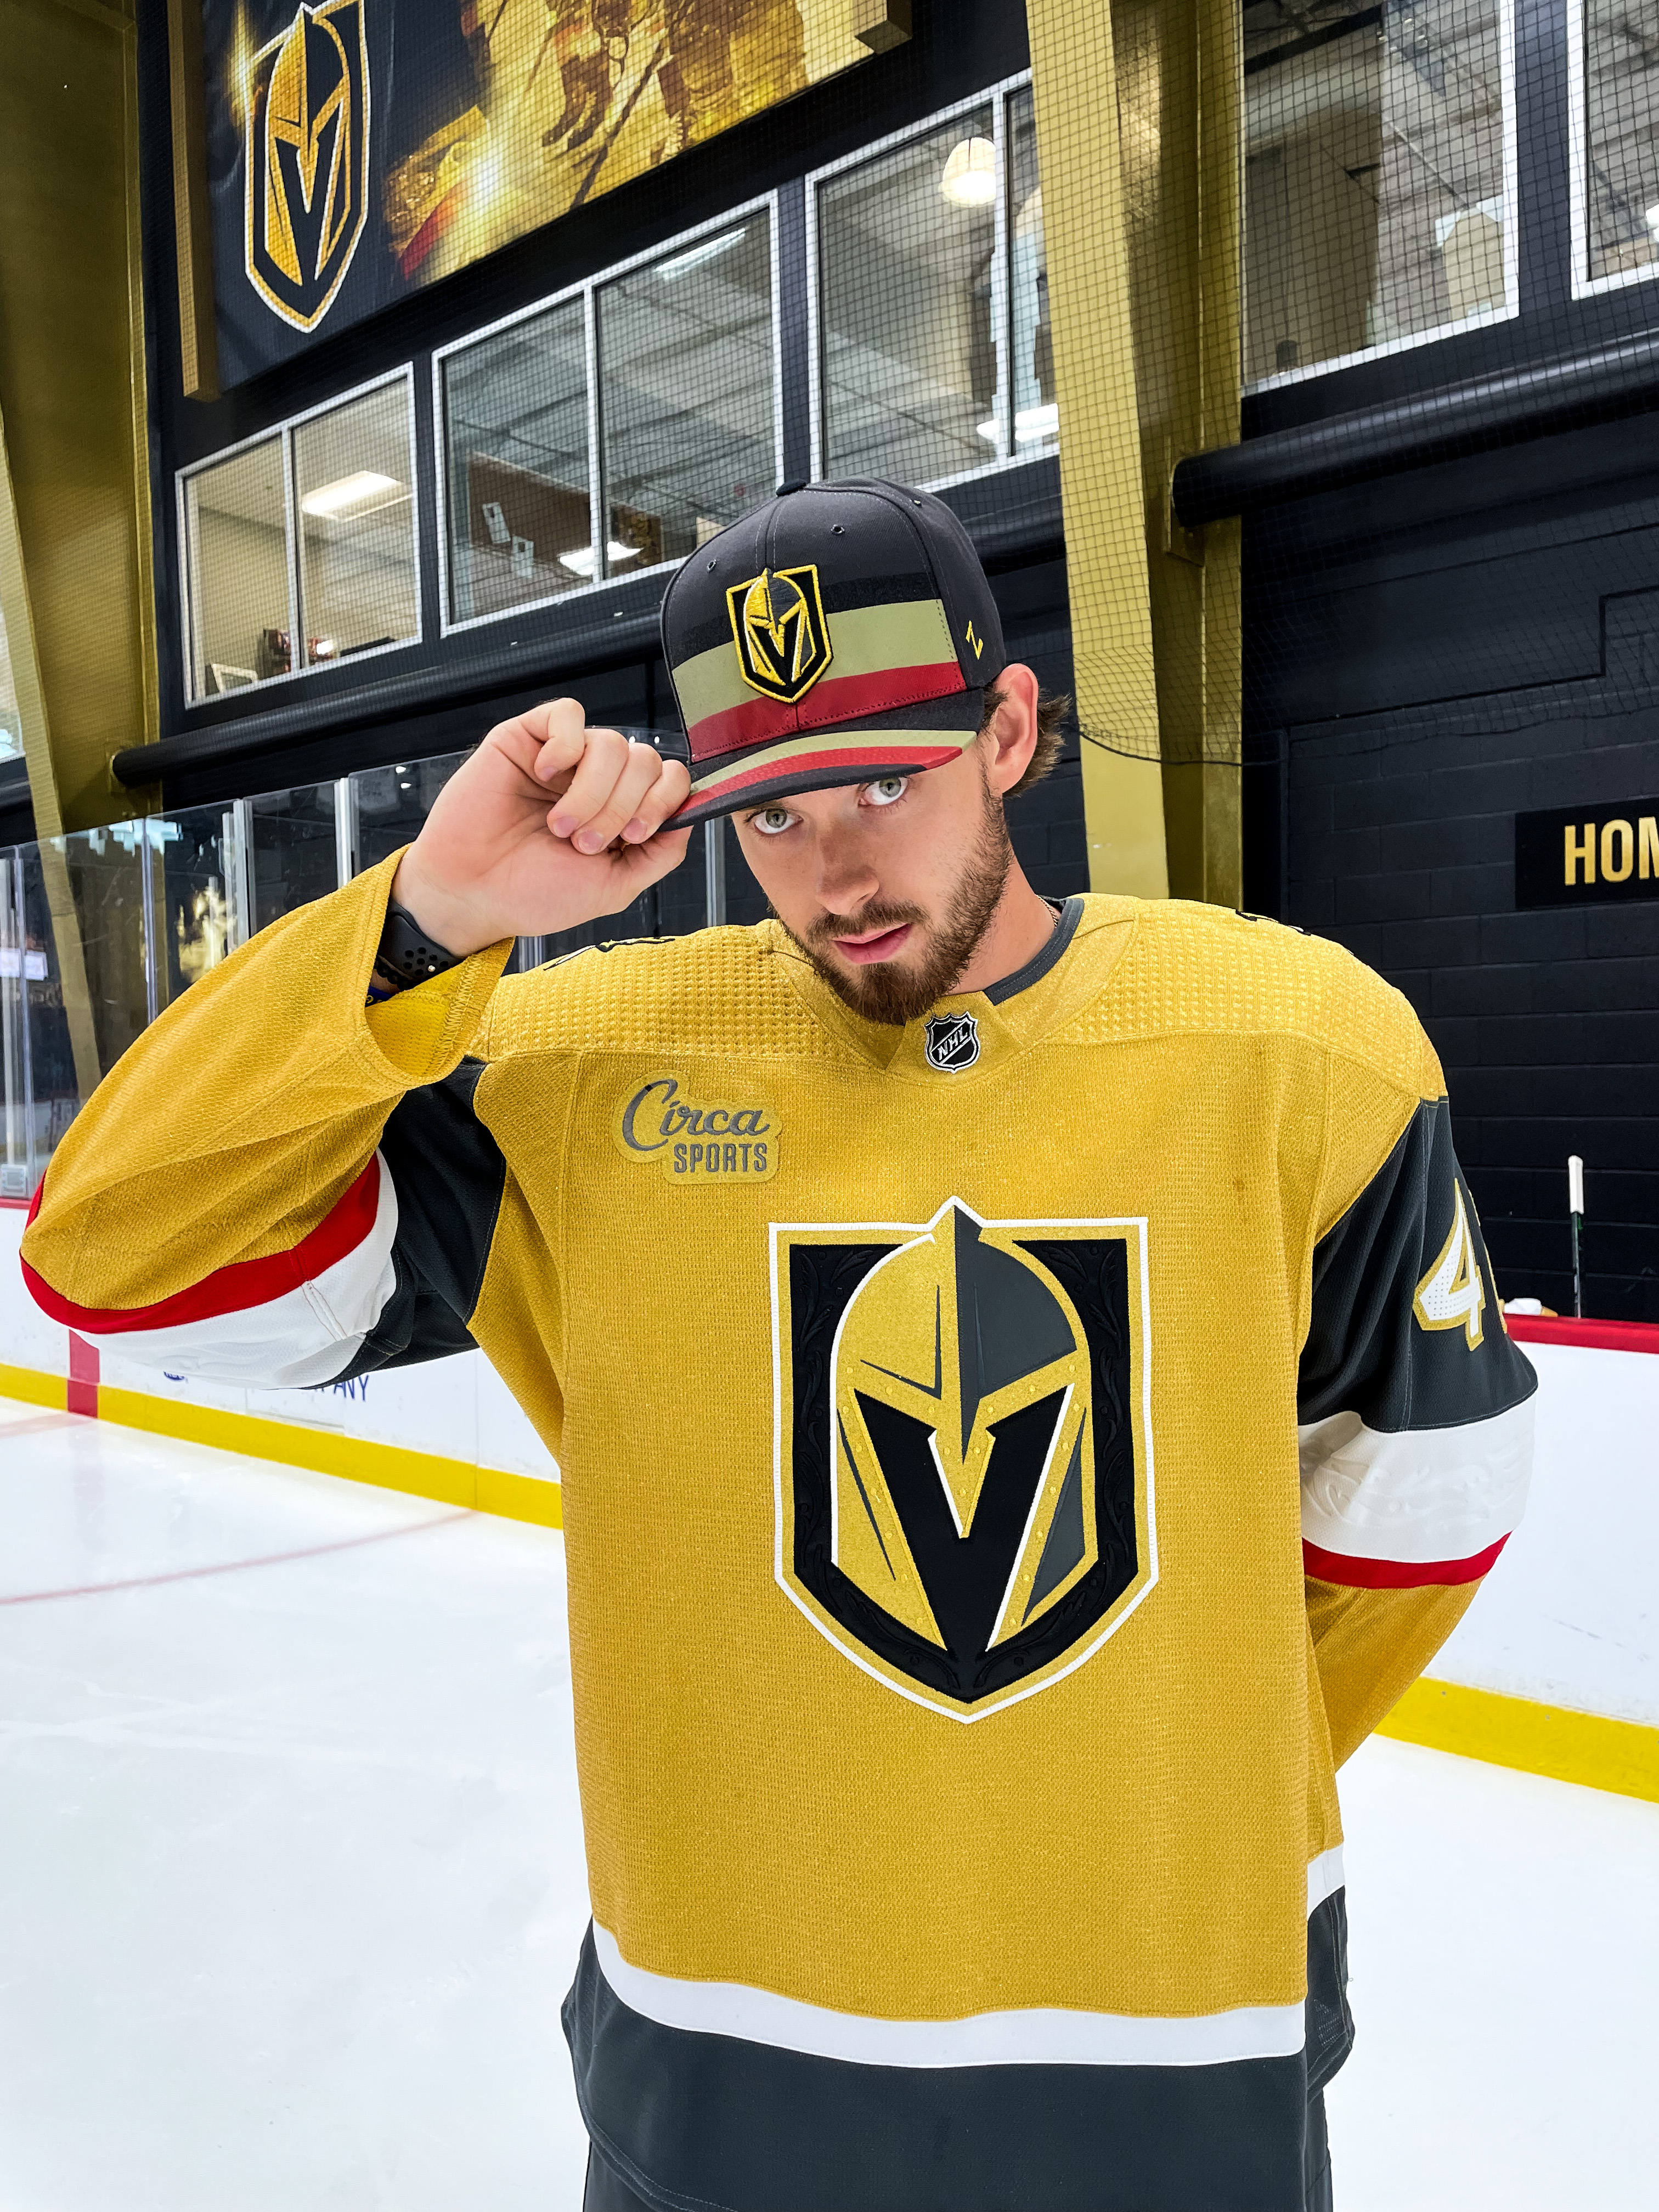 Vegas Golden Knights Gear on X: Tipping our hats to this guy for